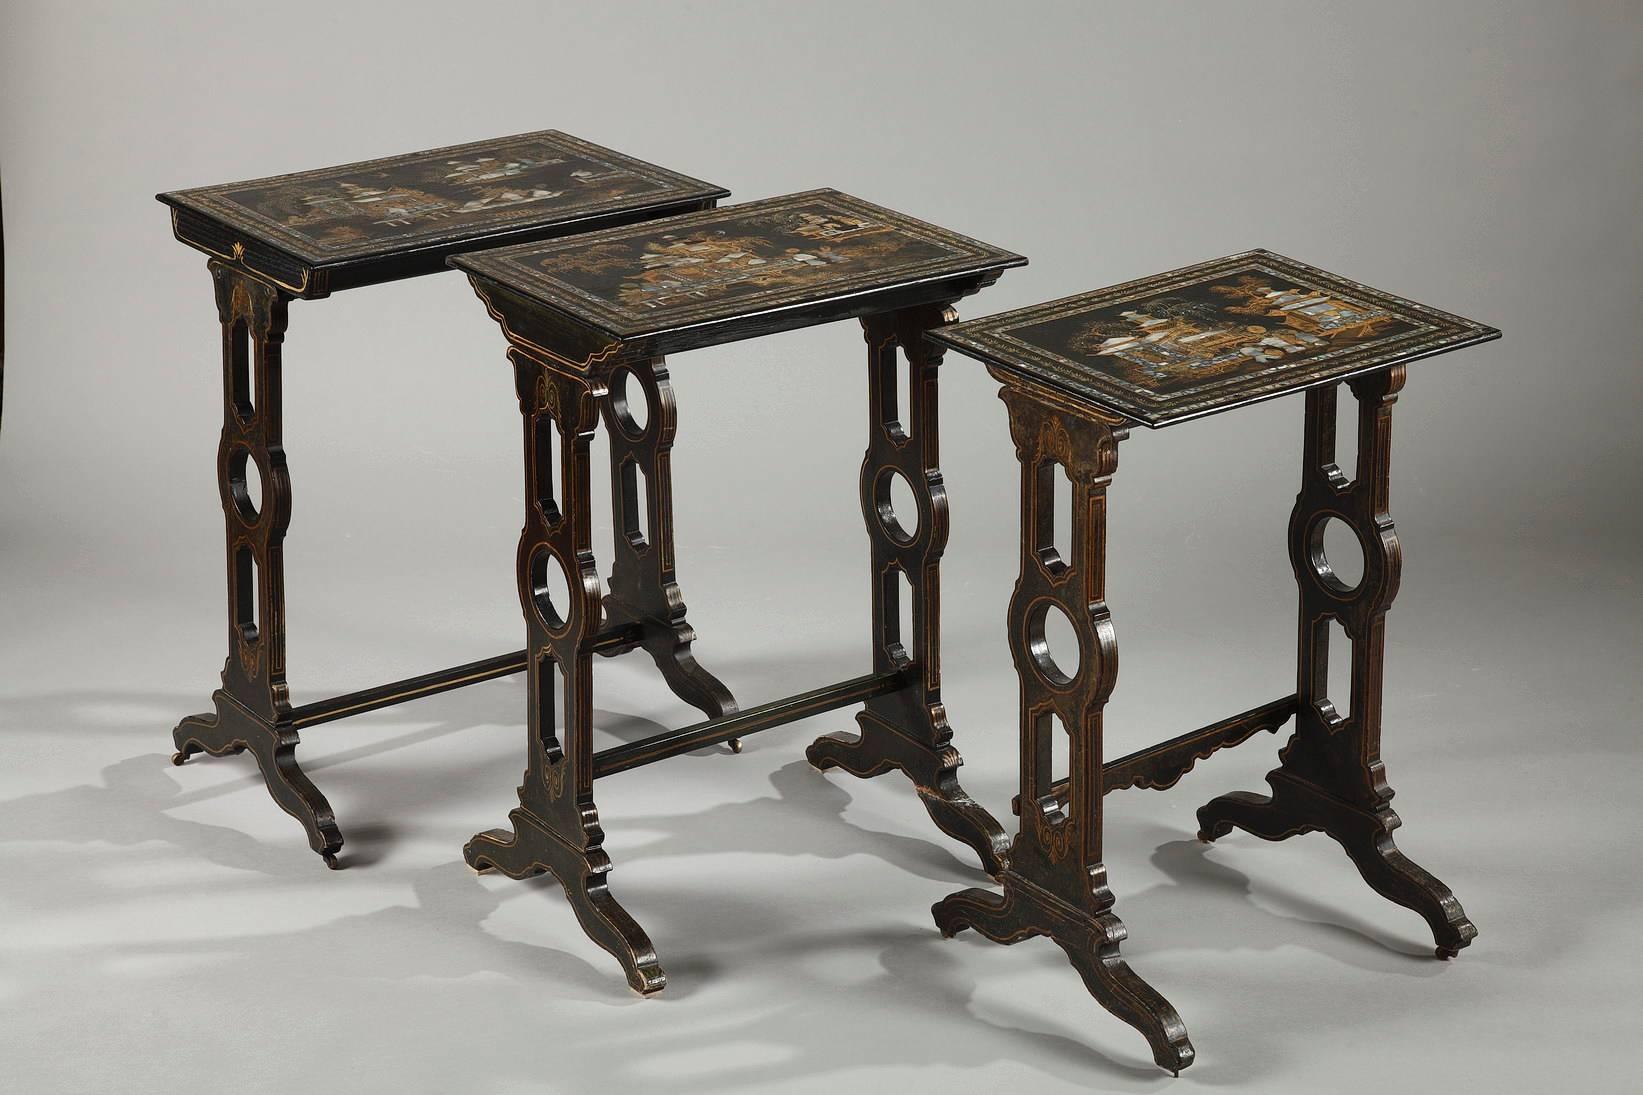 Napoleon III tables in blackwood accented with gold and mother-of-pearl. The tops of the tables are adorned with exotic landscapes inspired by the Far East featuring luxurious vegetation, pagodas, and characters discussing or walking. Each table